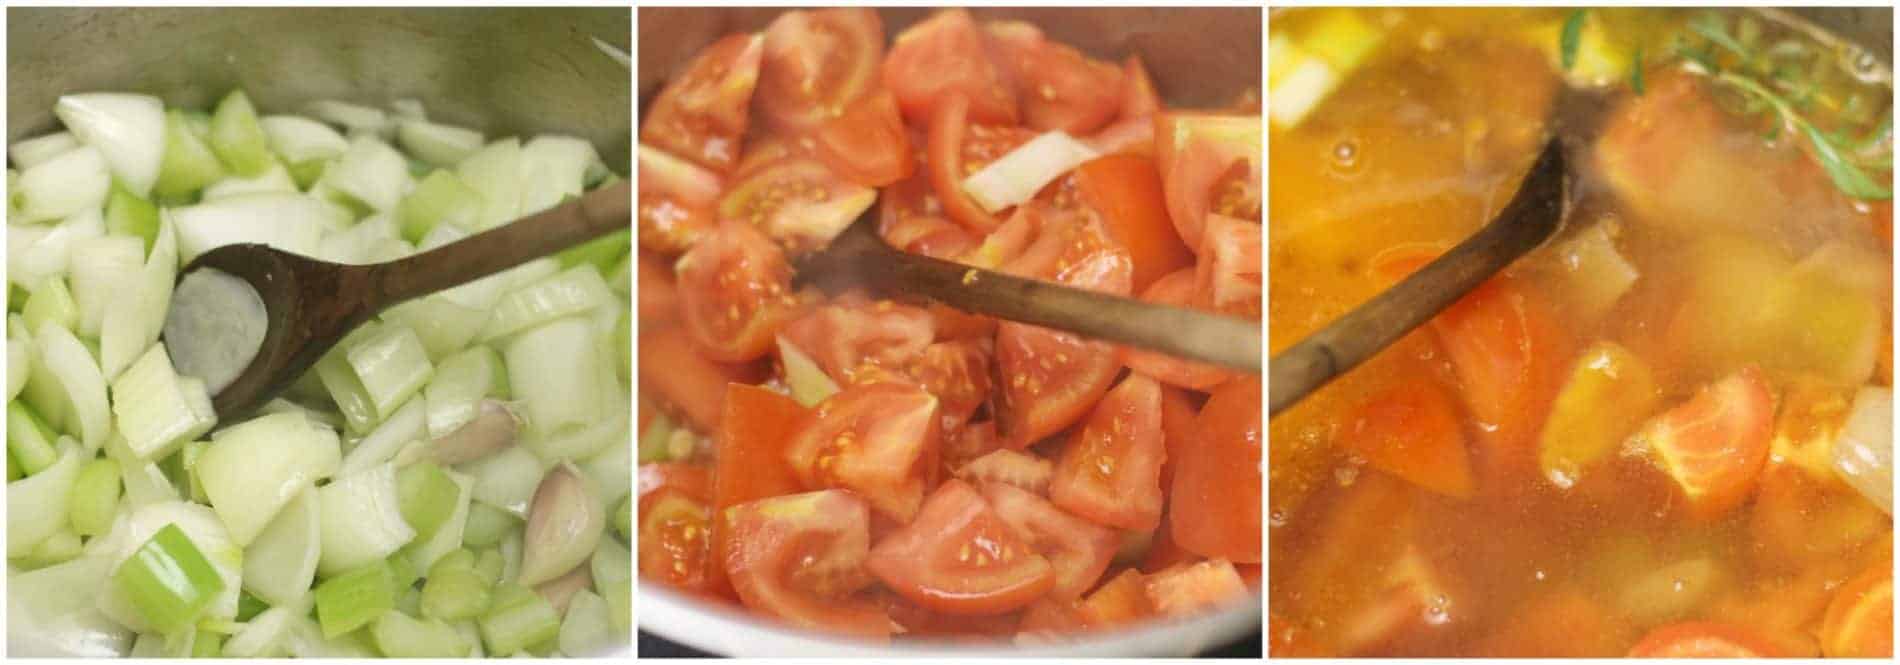 Cook the tomato sauce over medium low heat to let it simmer without scorching.